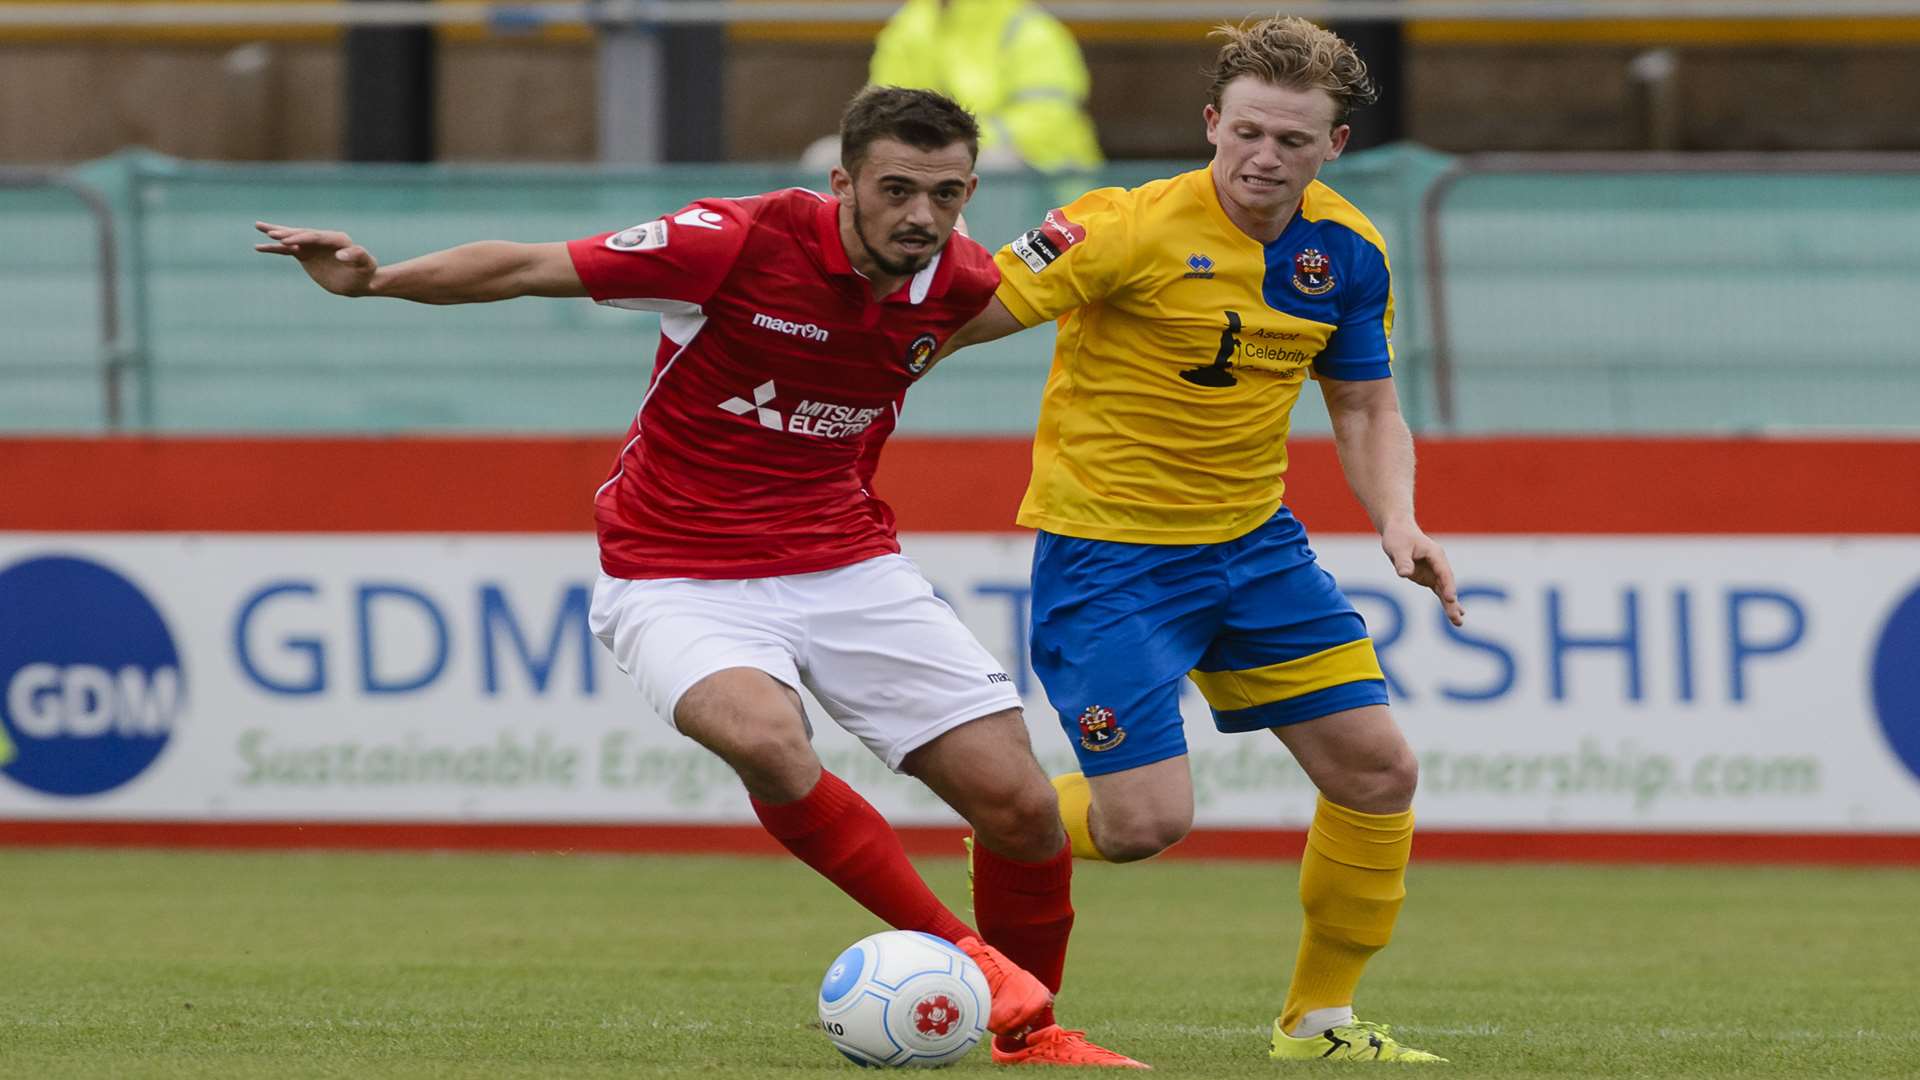 Jack Powell has the talent to go a long way in the game says Fleet boss Daryl McMahon Picture: Andy Payton